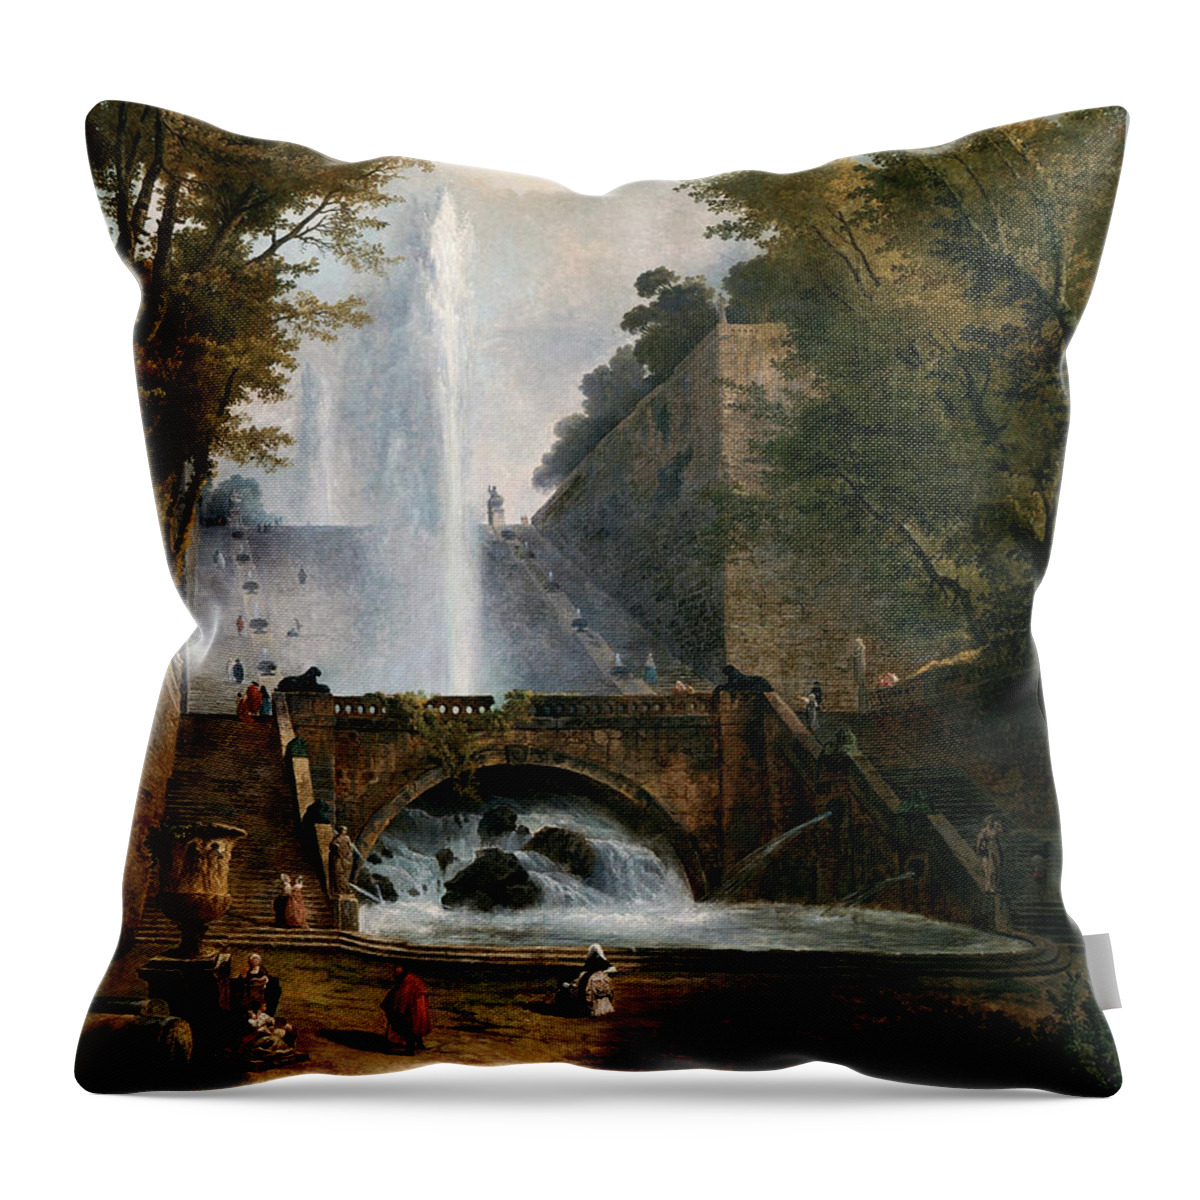 Stair And Fountain Throw Pillow featuring the painting Stair and Fountain in the Park of a Roman Villa by Rolando Burbon